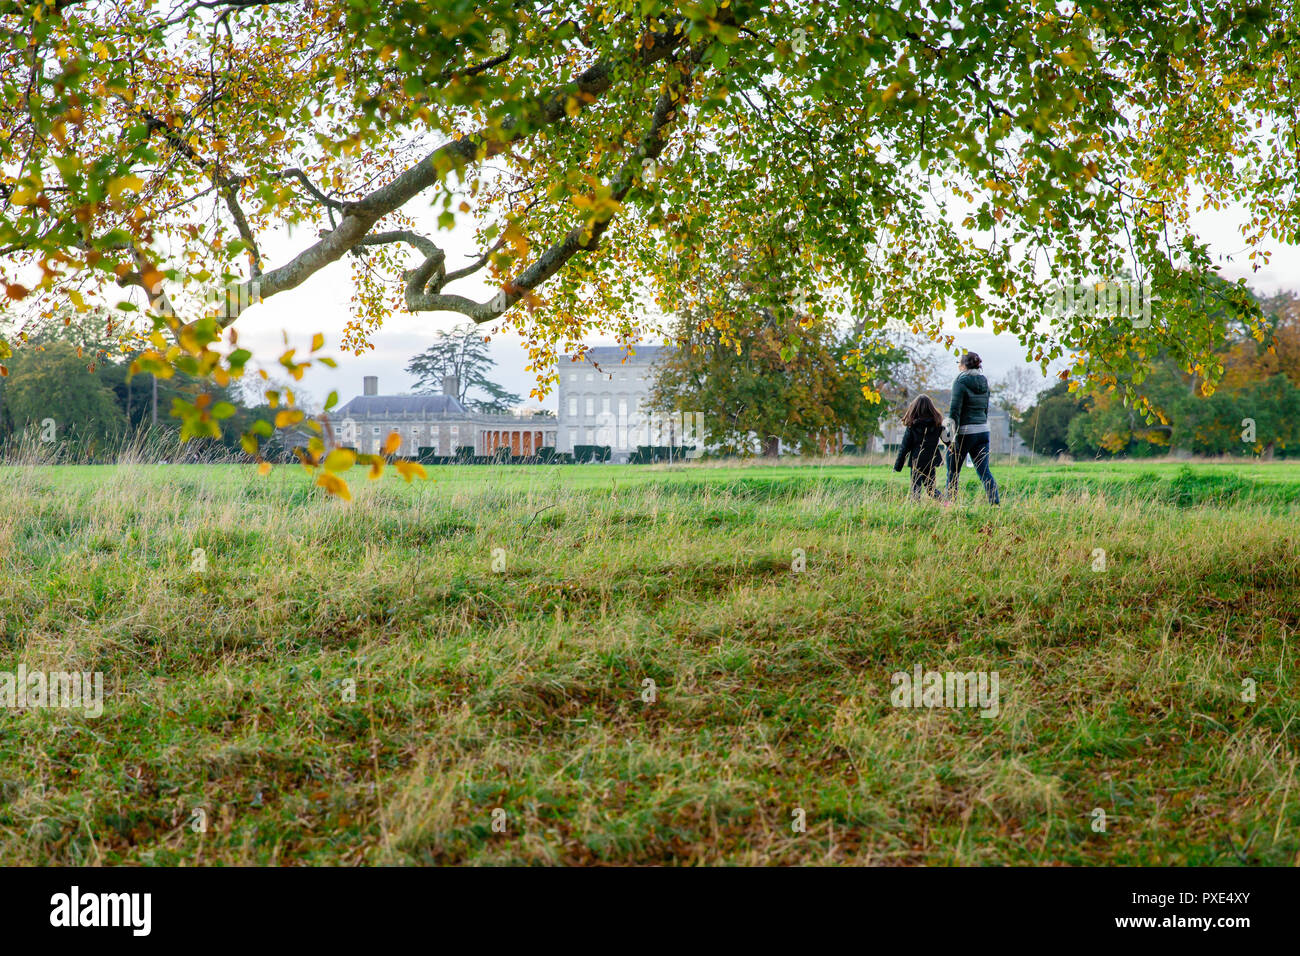 Celbridge, Kildare, Ireland: 21st October 2018. Ireland Weather: Beatuful Sunday afternoon with warm sunny spells  after wet morning. Autumn in full swing in the Castletown Park. Credit: Michael Grubka/Alamy Live News Stock Photo